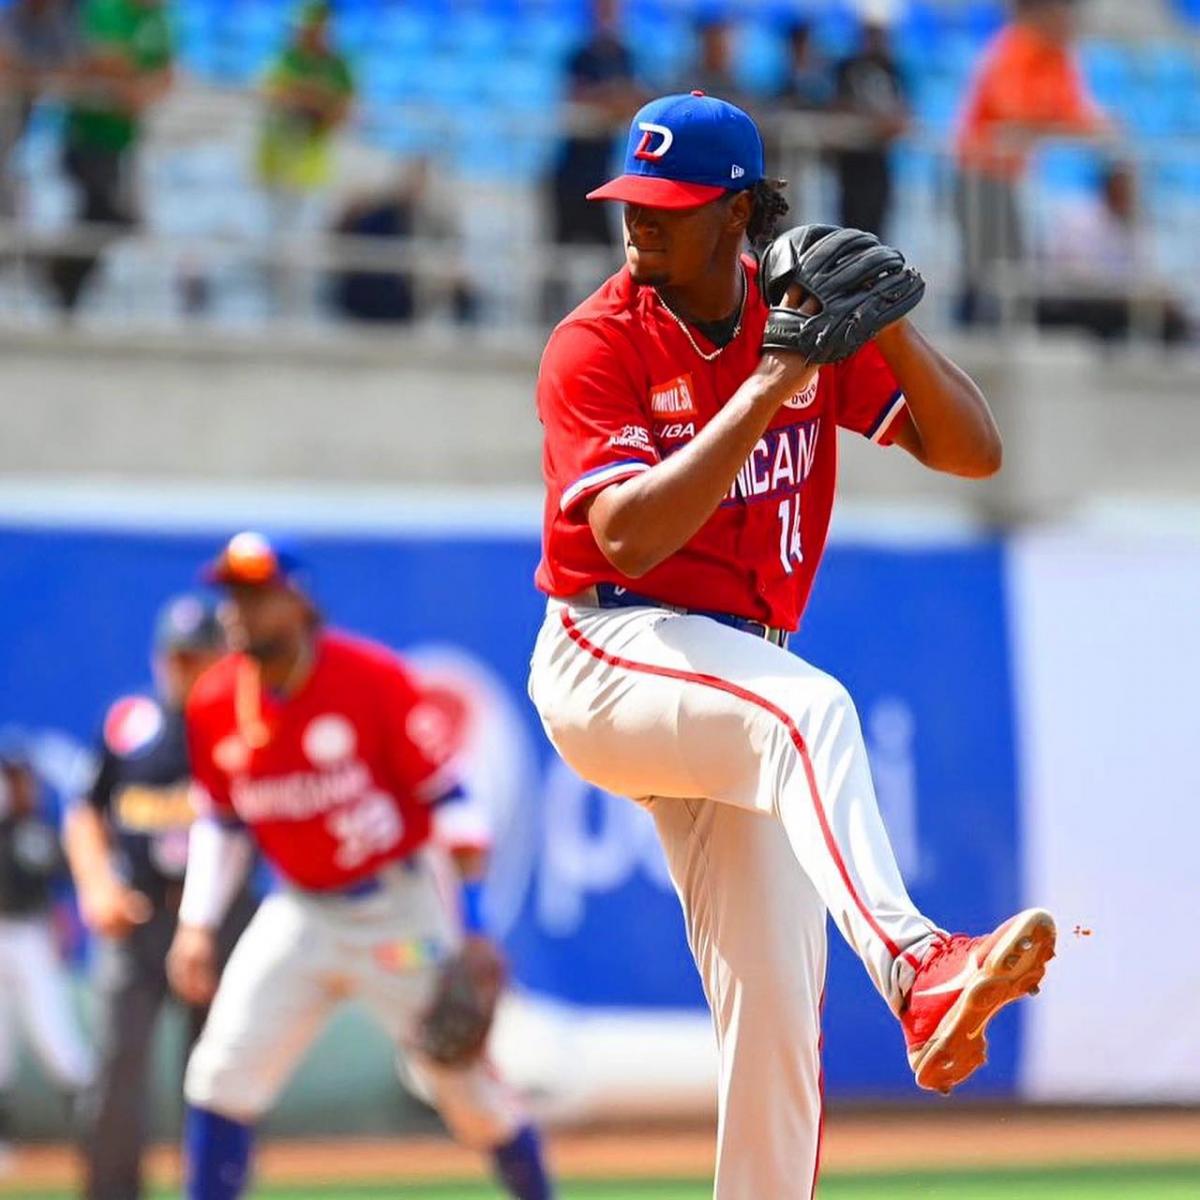 Domingo Robles pitching in a game // Source: Tigres del Licey